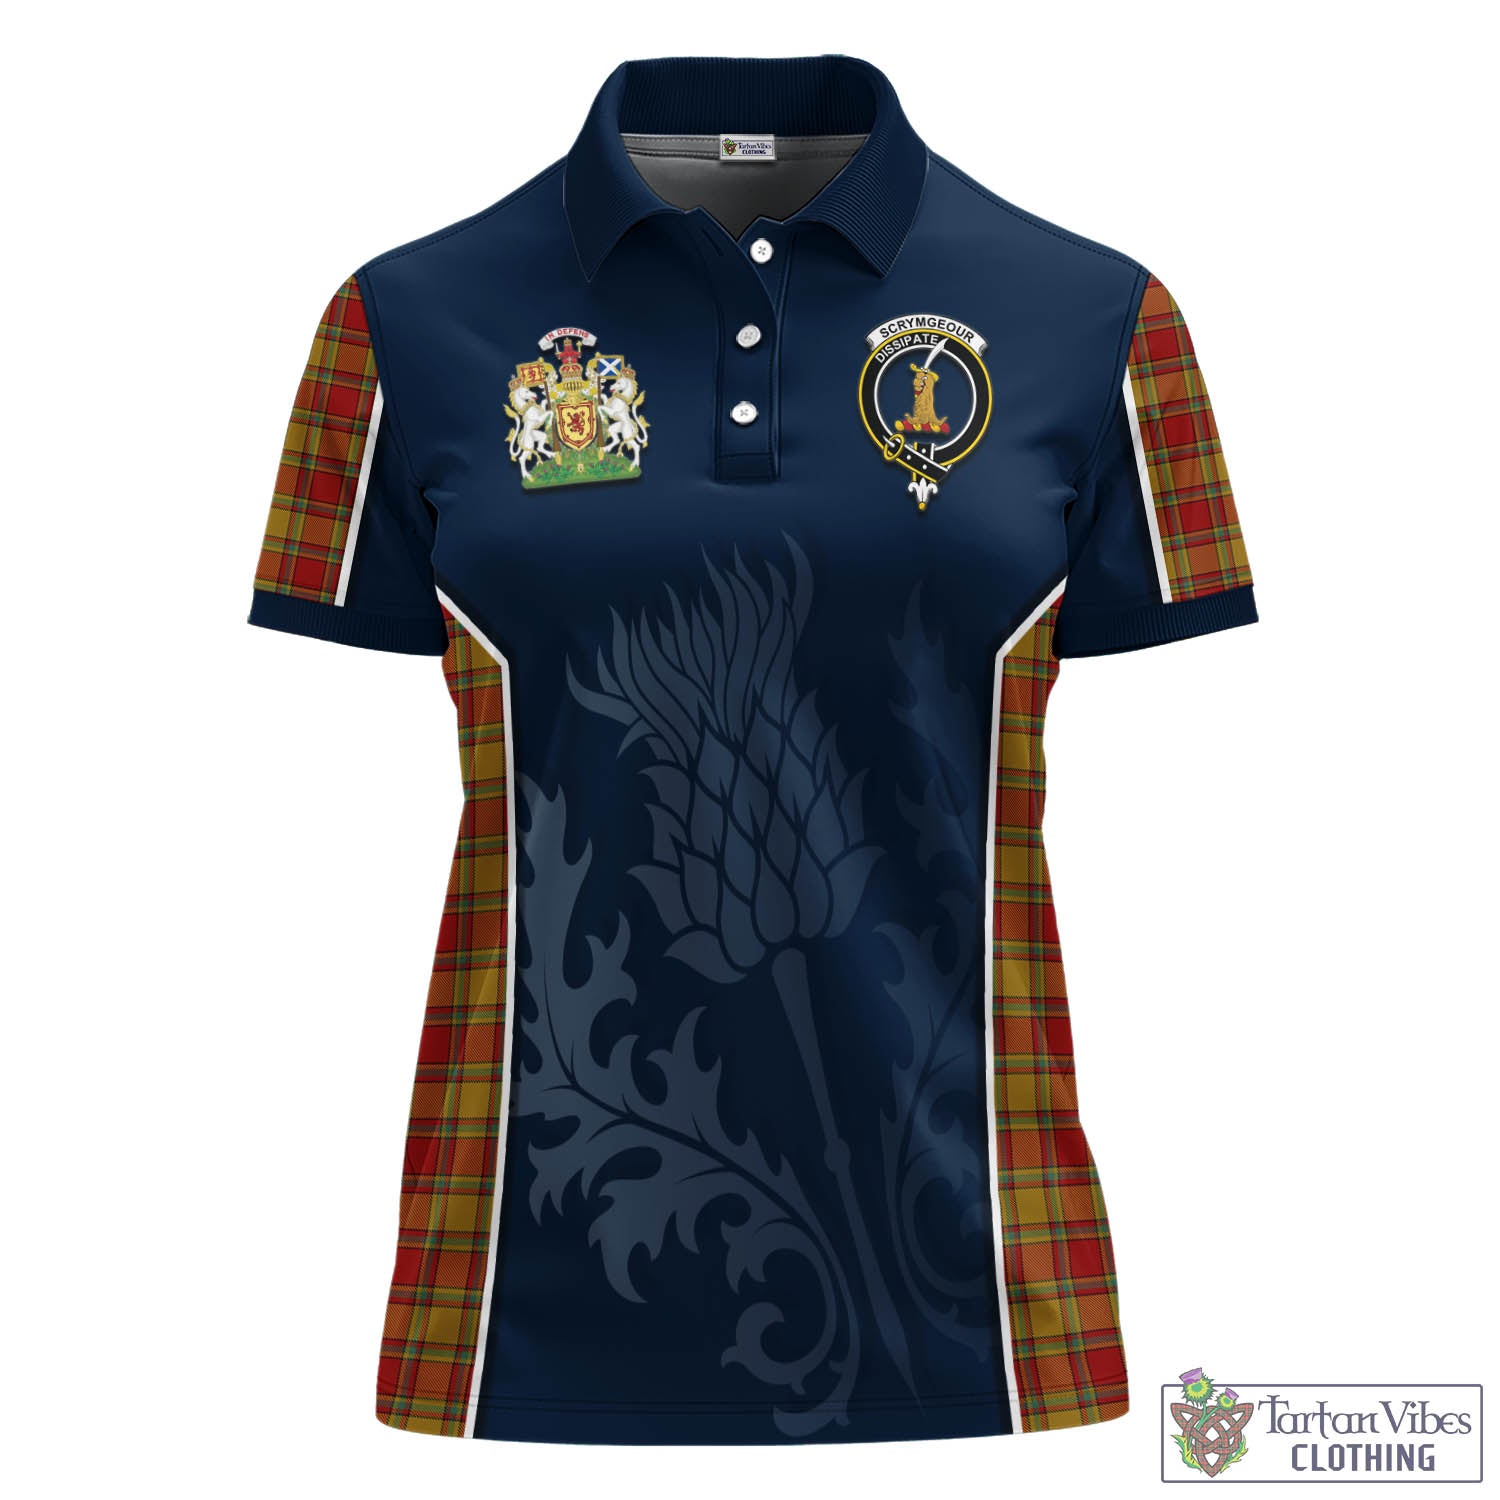 Tartan Vibes Clothing Scrymgeour Tartan Women's Polo Shirt with Family Crest and Scottish Thistle Vibes Sport Style